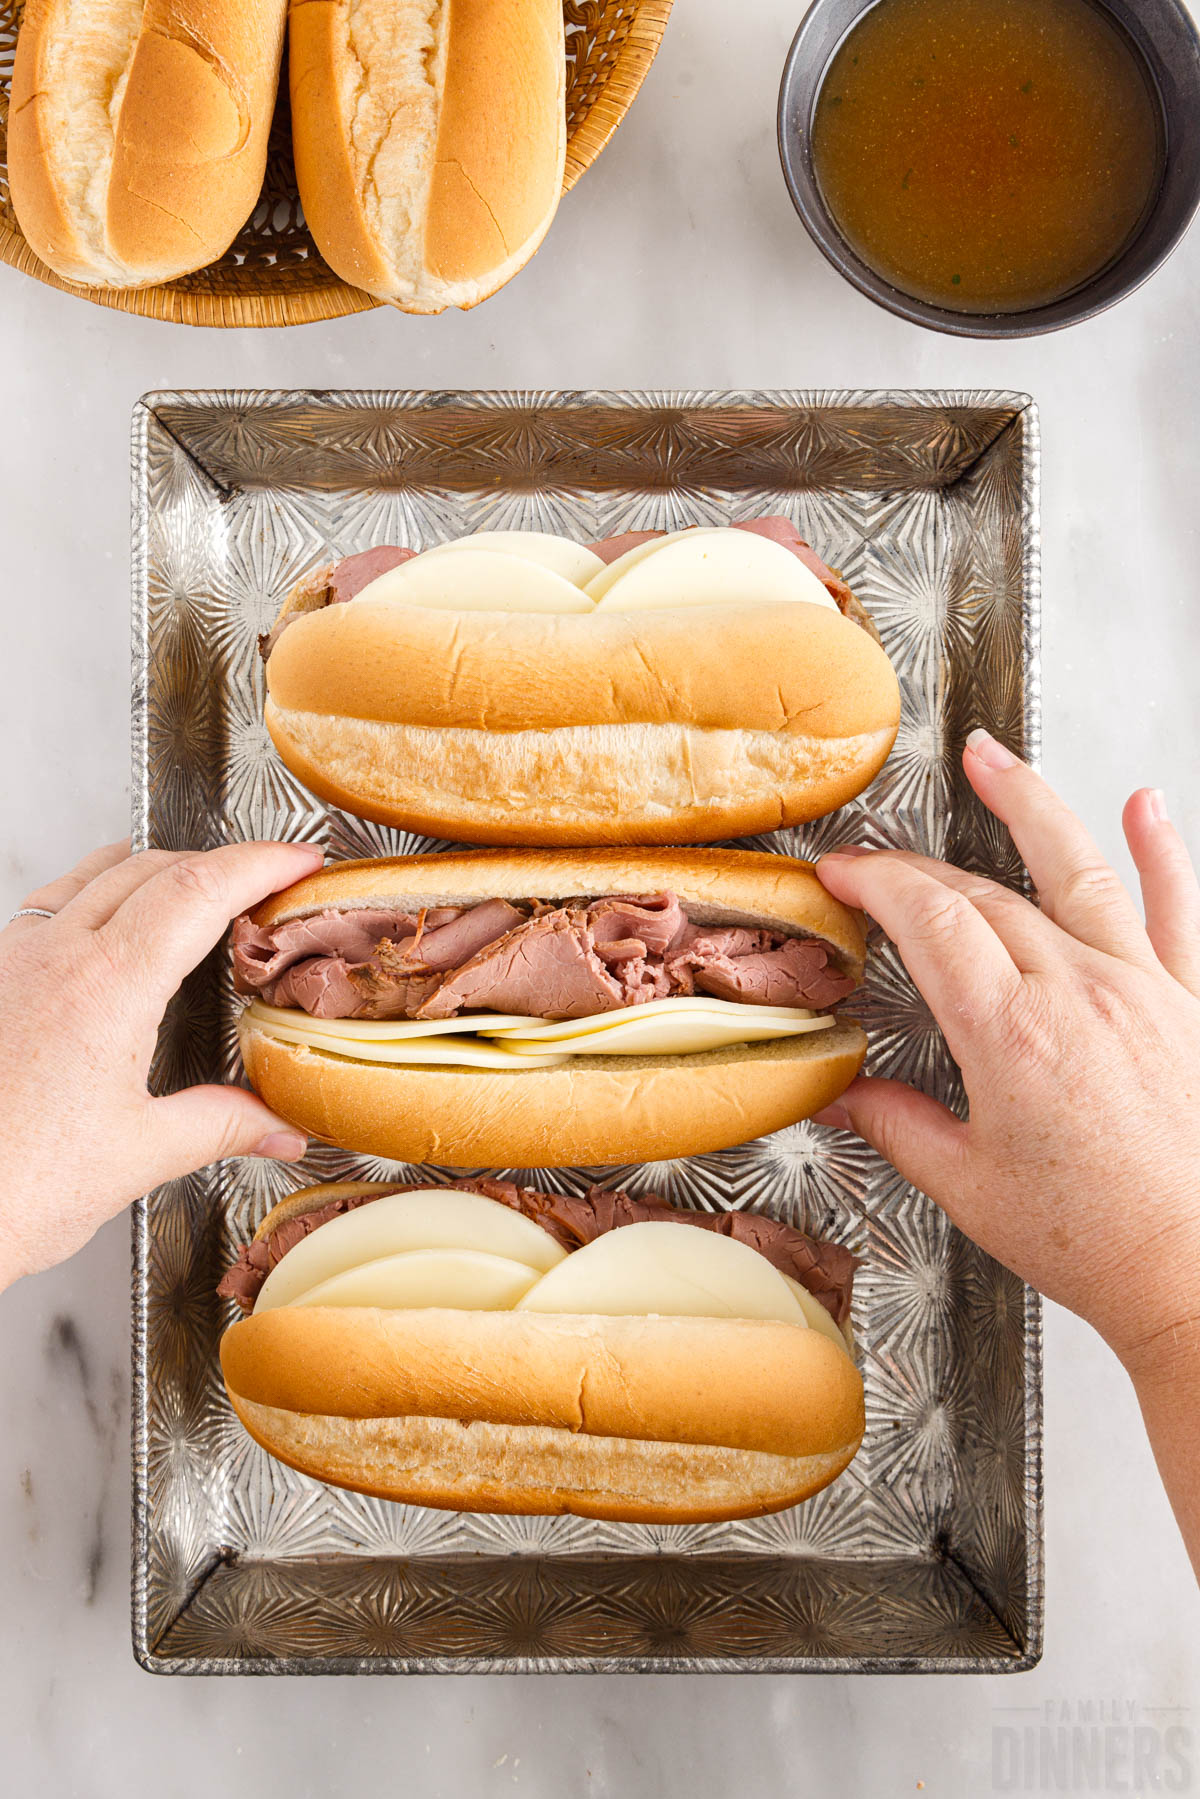 roast beef and cheese layered into hoagie rolls